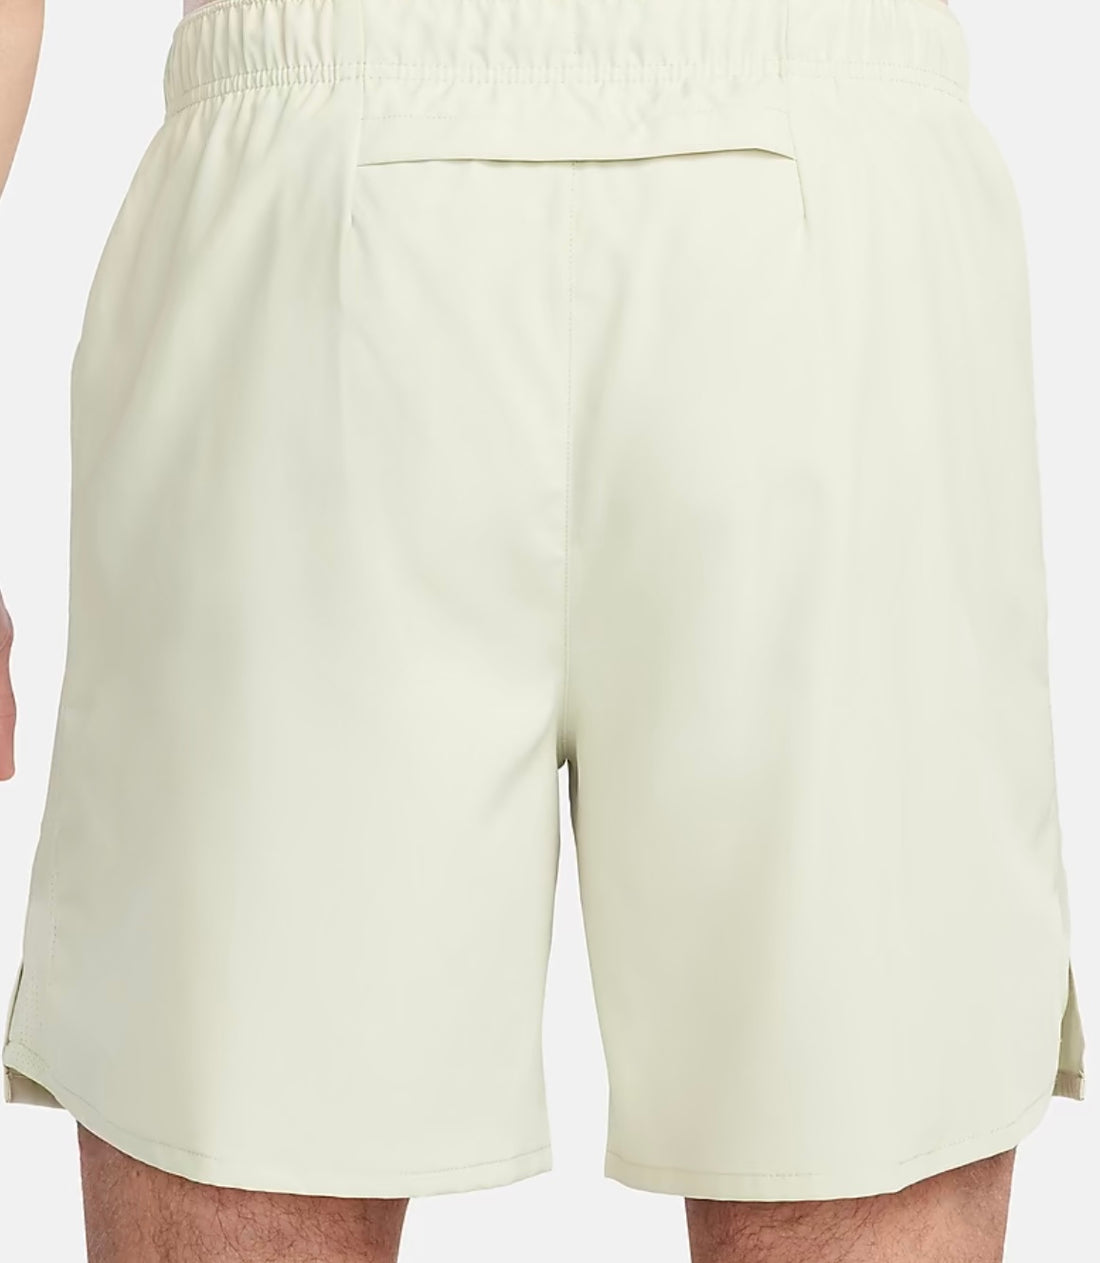 NIKE CHALLENGER SHORTS (7 INCH) - OLIVE